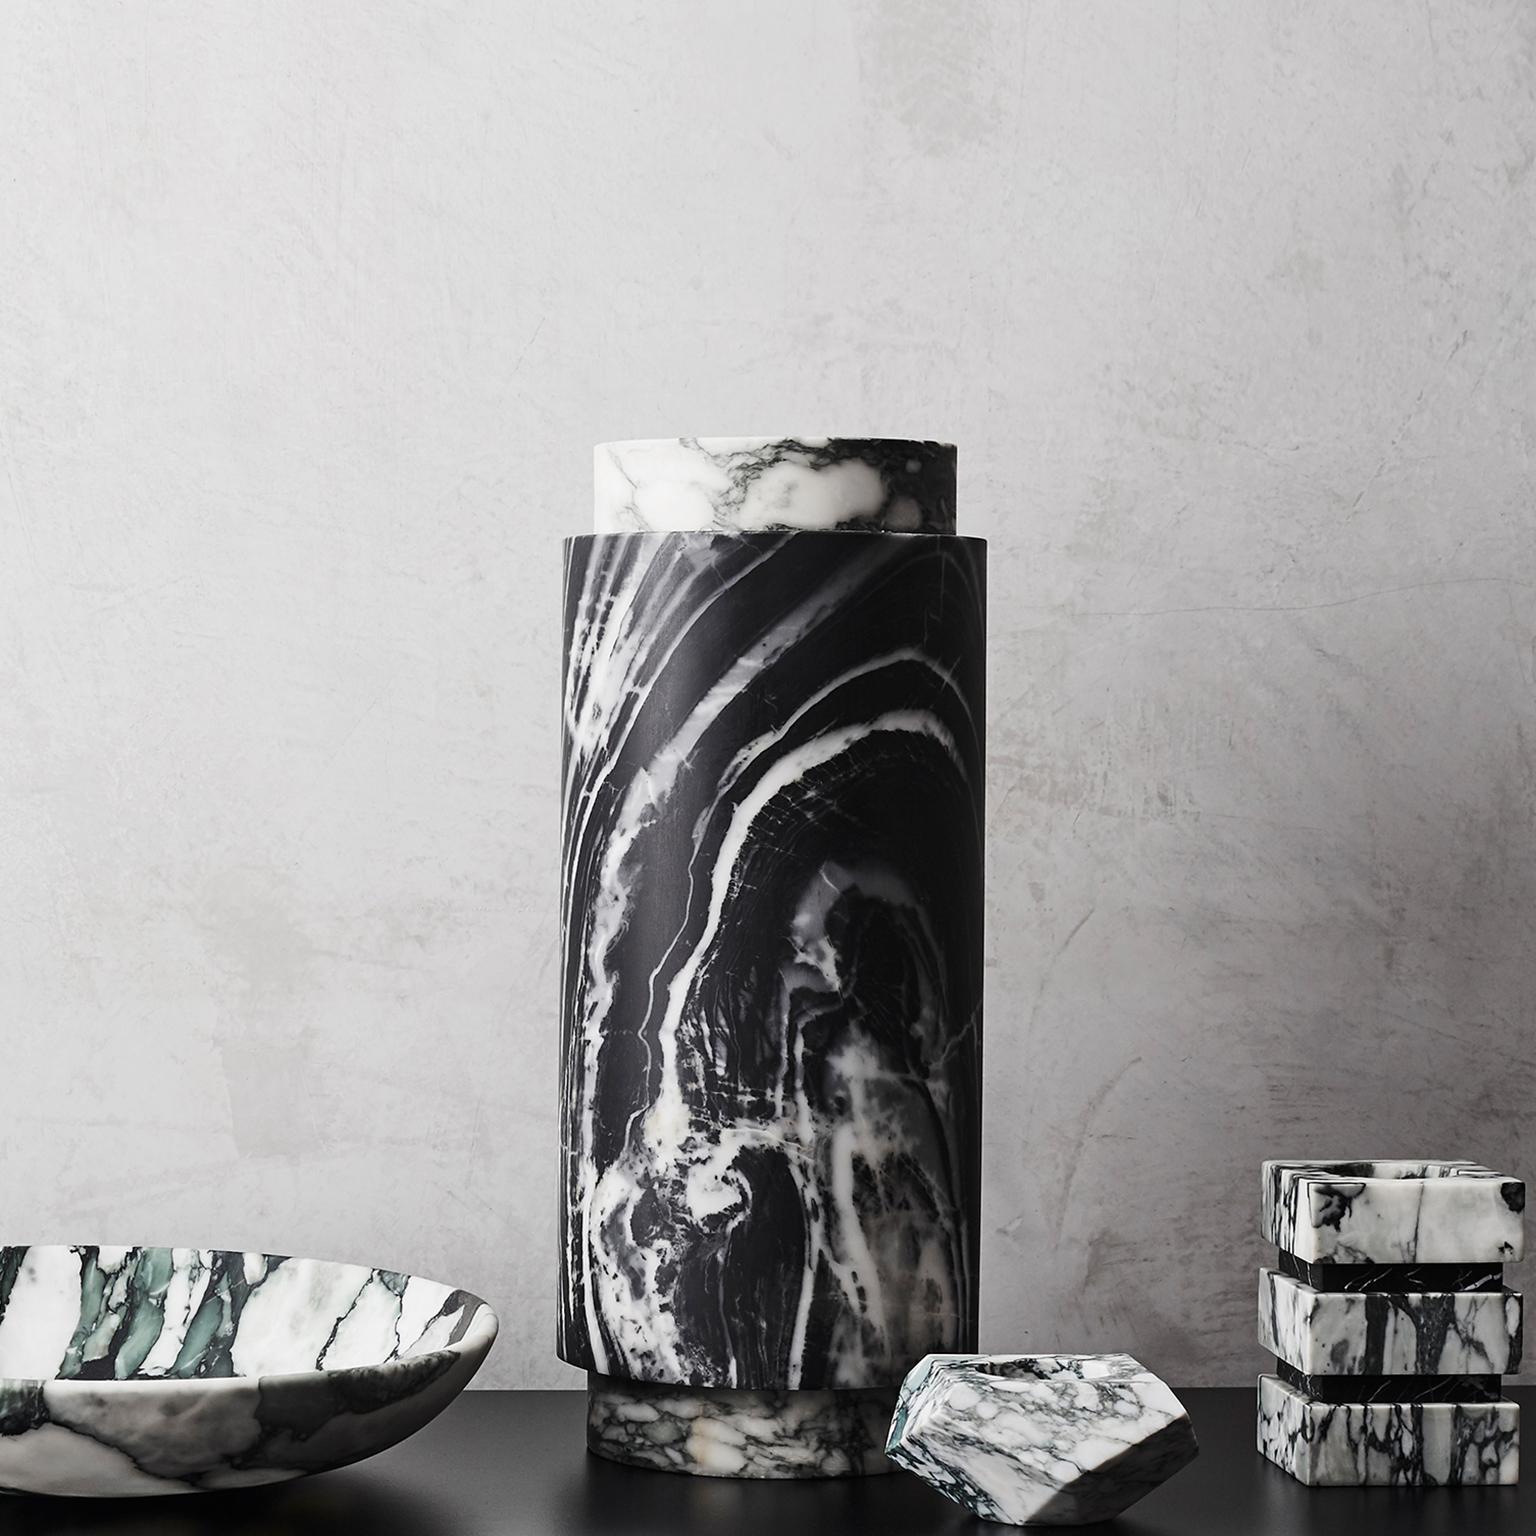 This stout, architectural design inspired by the work of Mario Botta, marries the playfulness of the Fiore marble and the drama of Nero Marble. Suited to use as a decorative ornament or pillar candle holder. 

Dimensions: L100mm/4